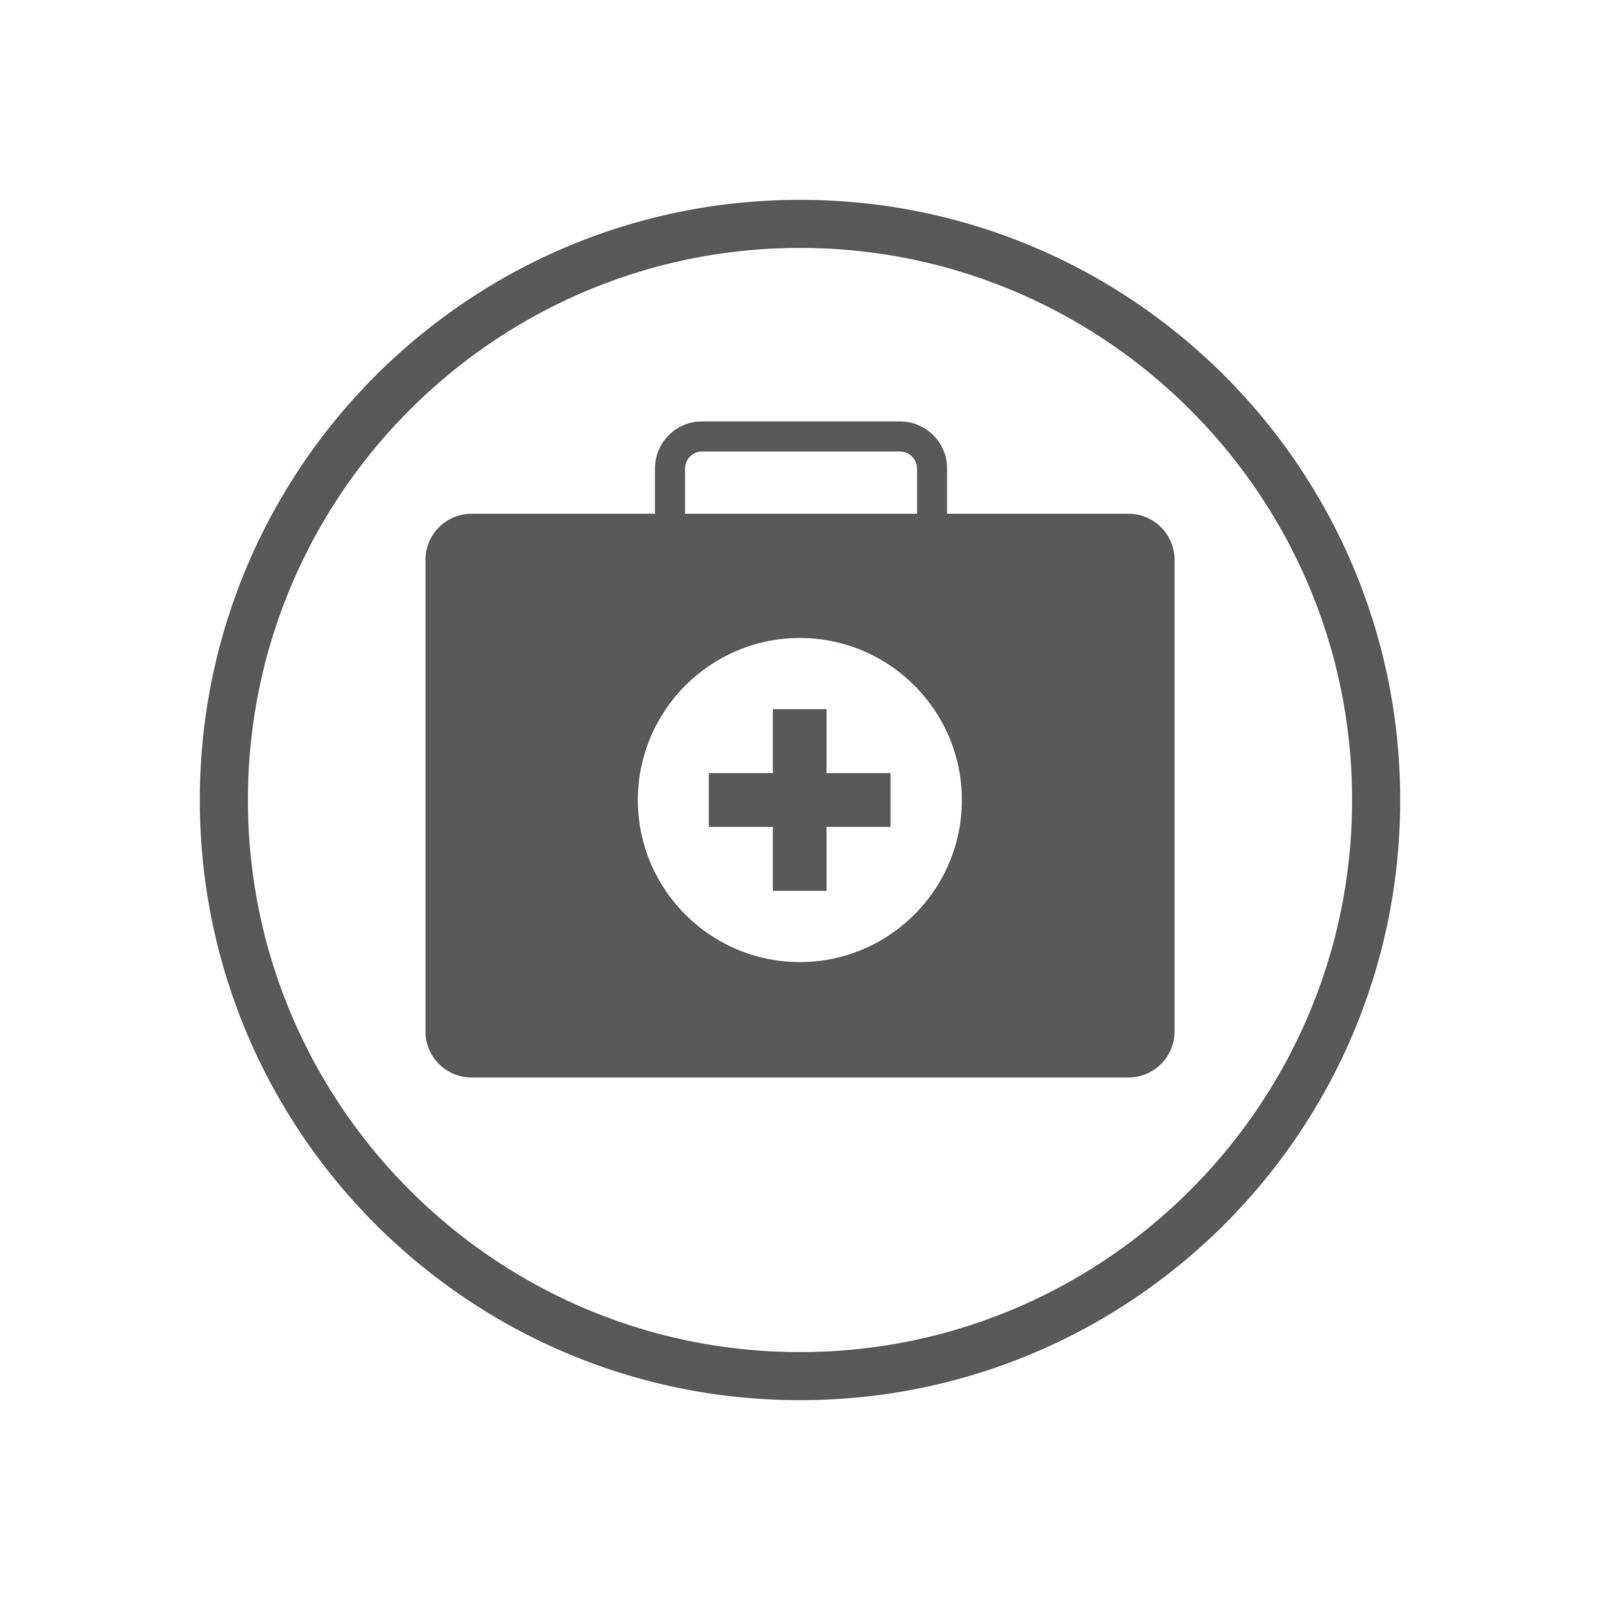 Linear First Aid Box icon, iconic symbol inside a circle, on white background. Vector Iconic Design.